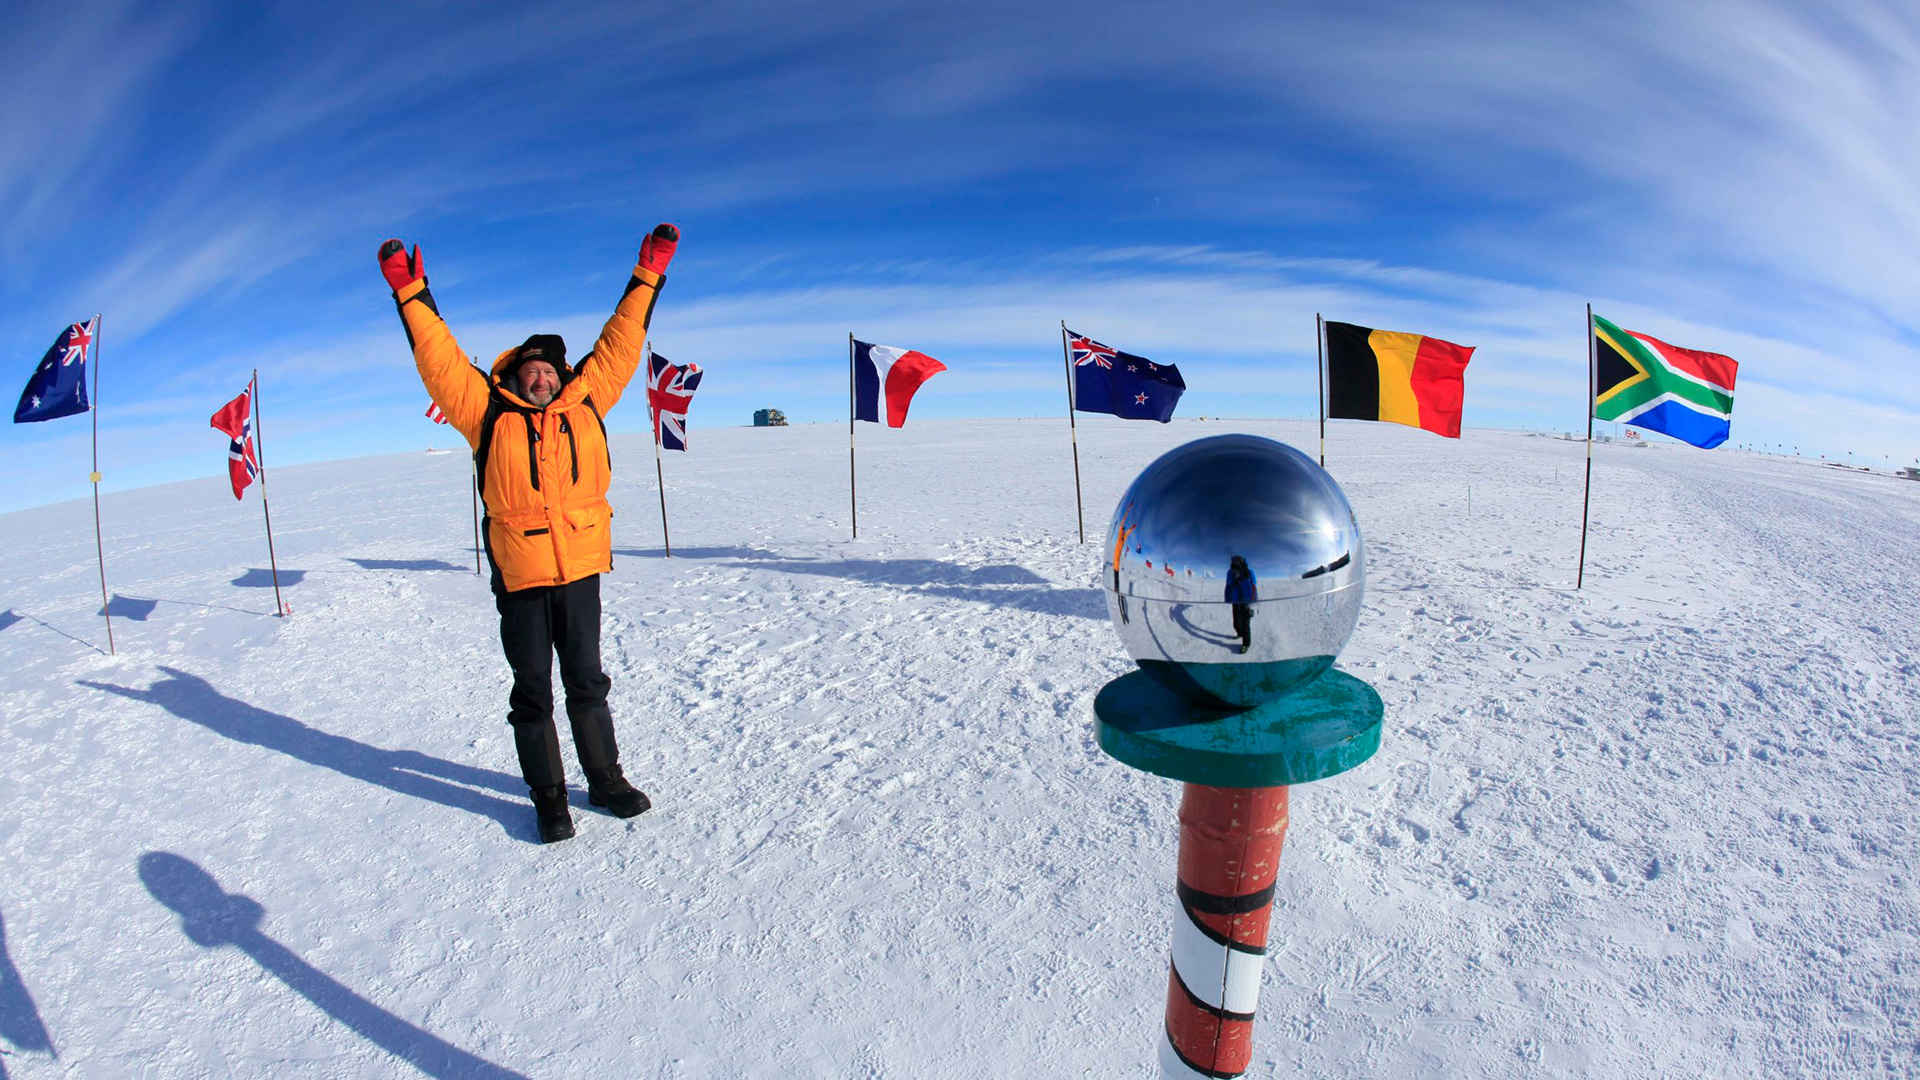 Antarctica_SouthPole_CeremonialSouthPole_-©JohnBeatty©_culture____20120117_001446_160_5616x3744_9.1MB-scaled